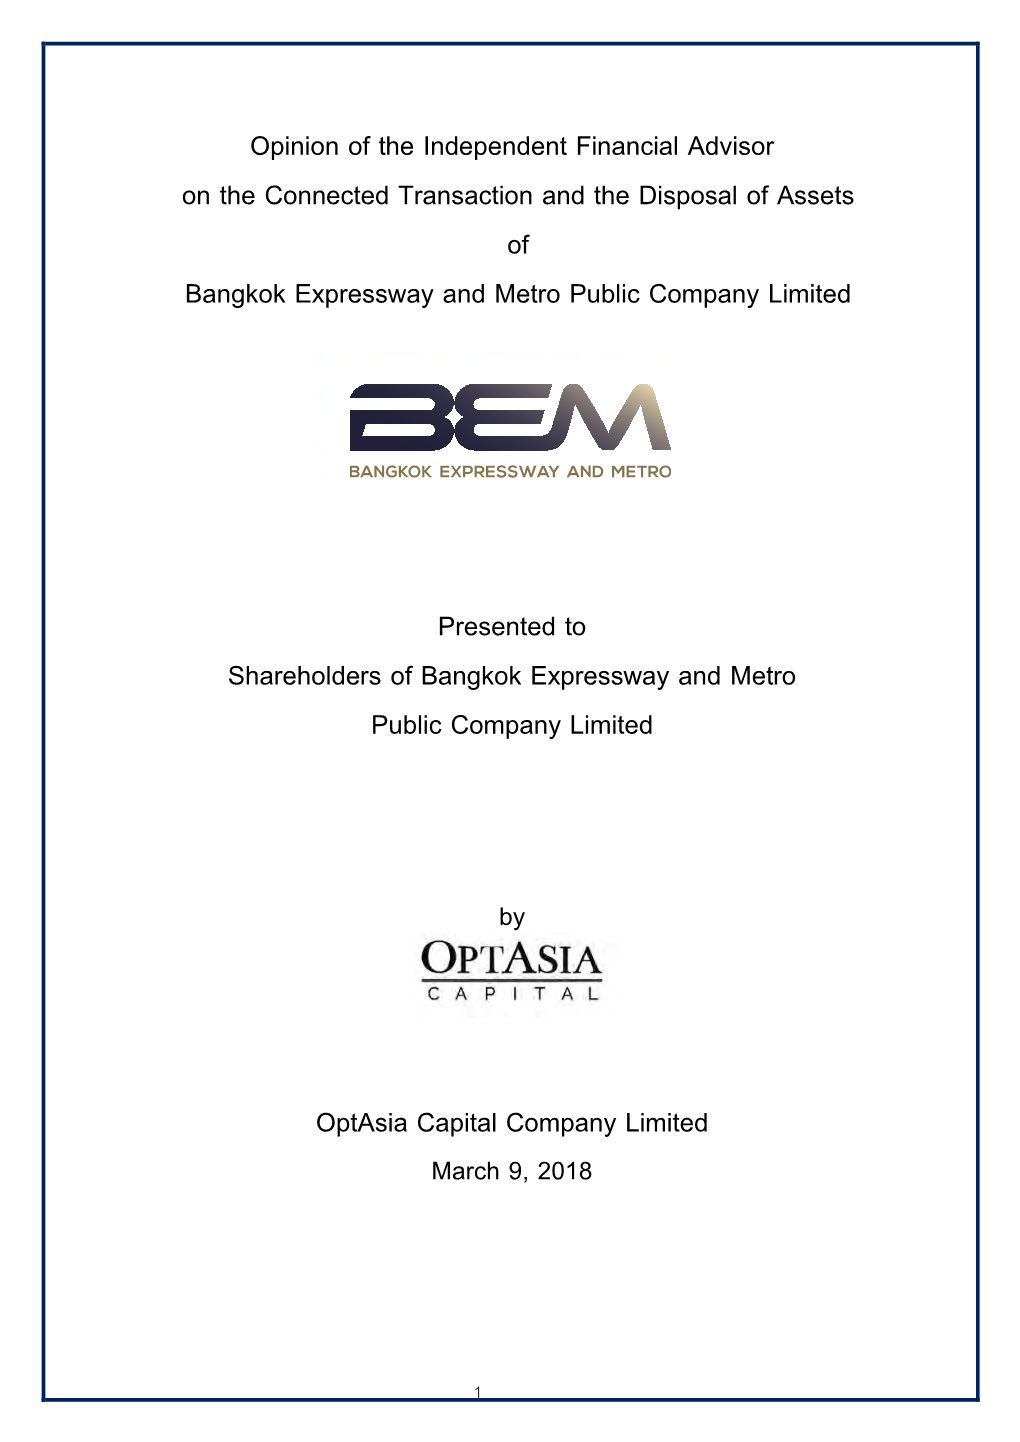 Opinion of the Independent Financial Advisor on the Connected Transaction and the Disposal of Assets of Bangkok Expressway and Metro Public Company Limited